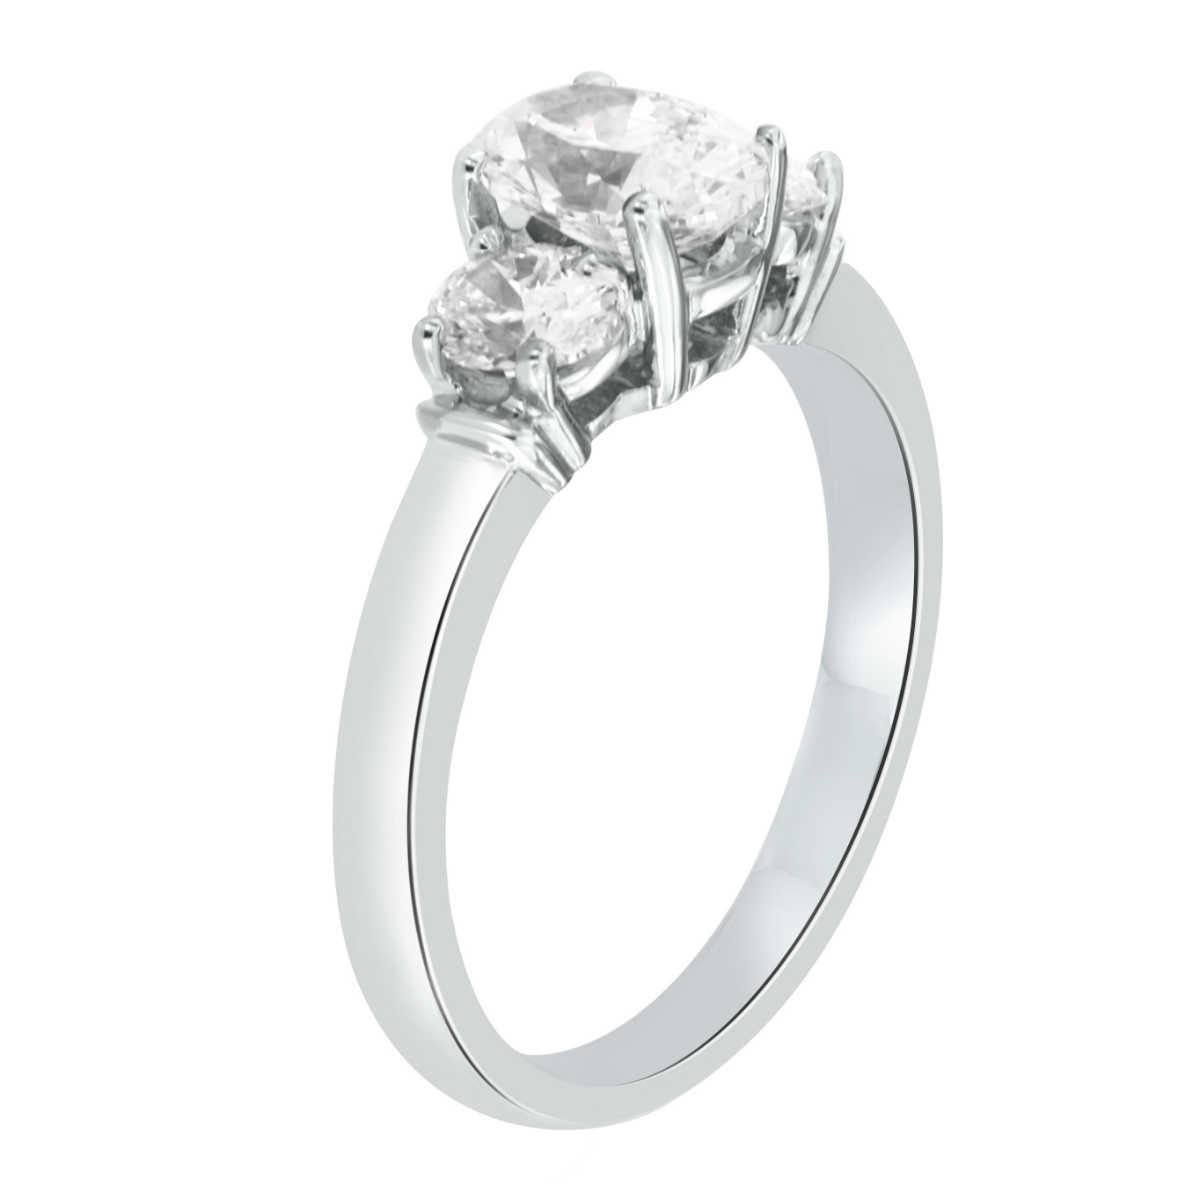 This 18K White Gold handcrafted Women's trilogy ring showcases a GIA Certified 0.91 Carat Oval Cut diamond accompanied by two (2) perfectly matched Oval Cut diamonds on each side in 0.47 Carat Total Weight. Average color and clarity H-I VS2

Center